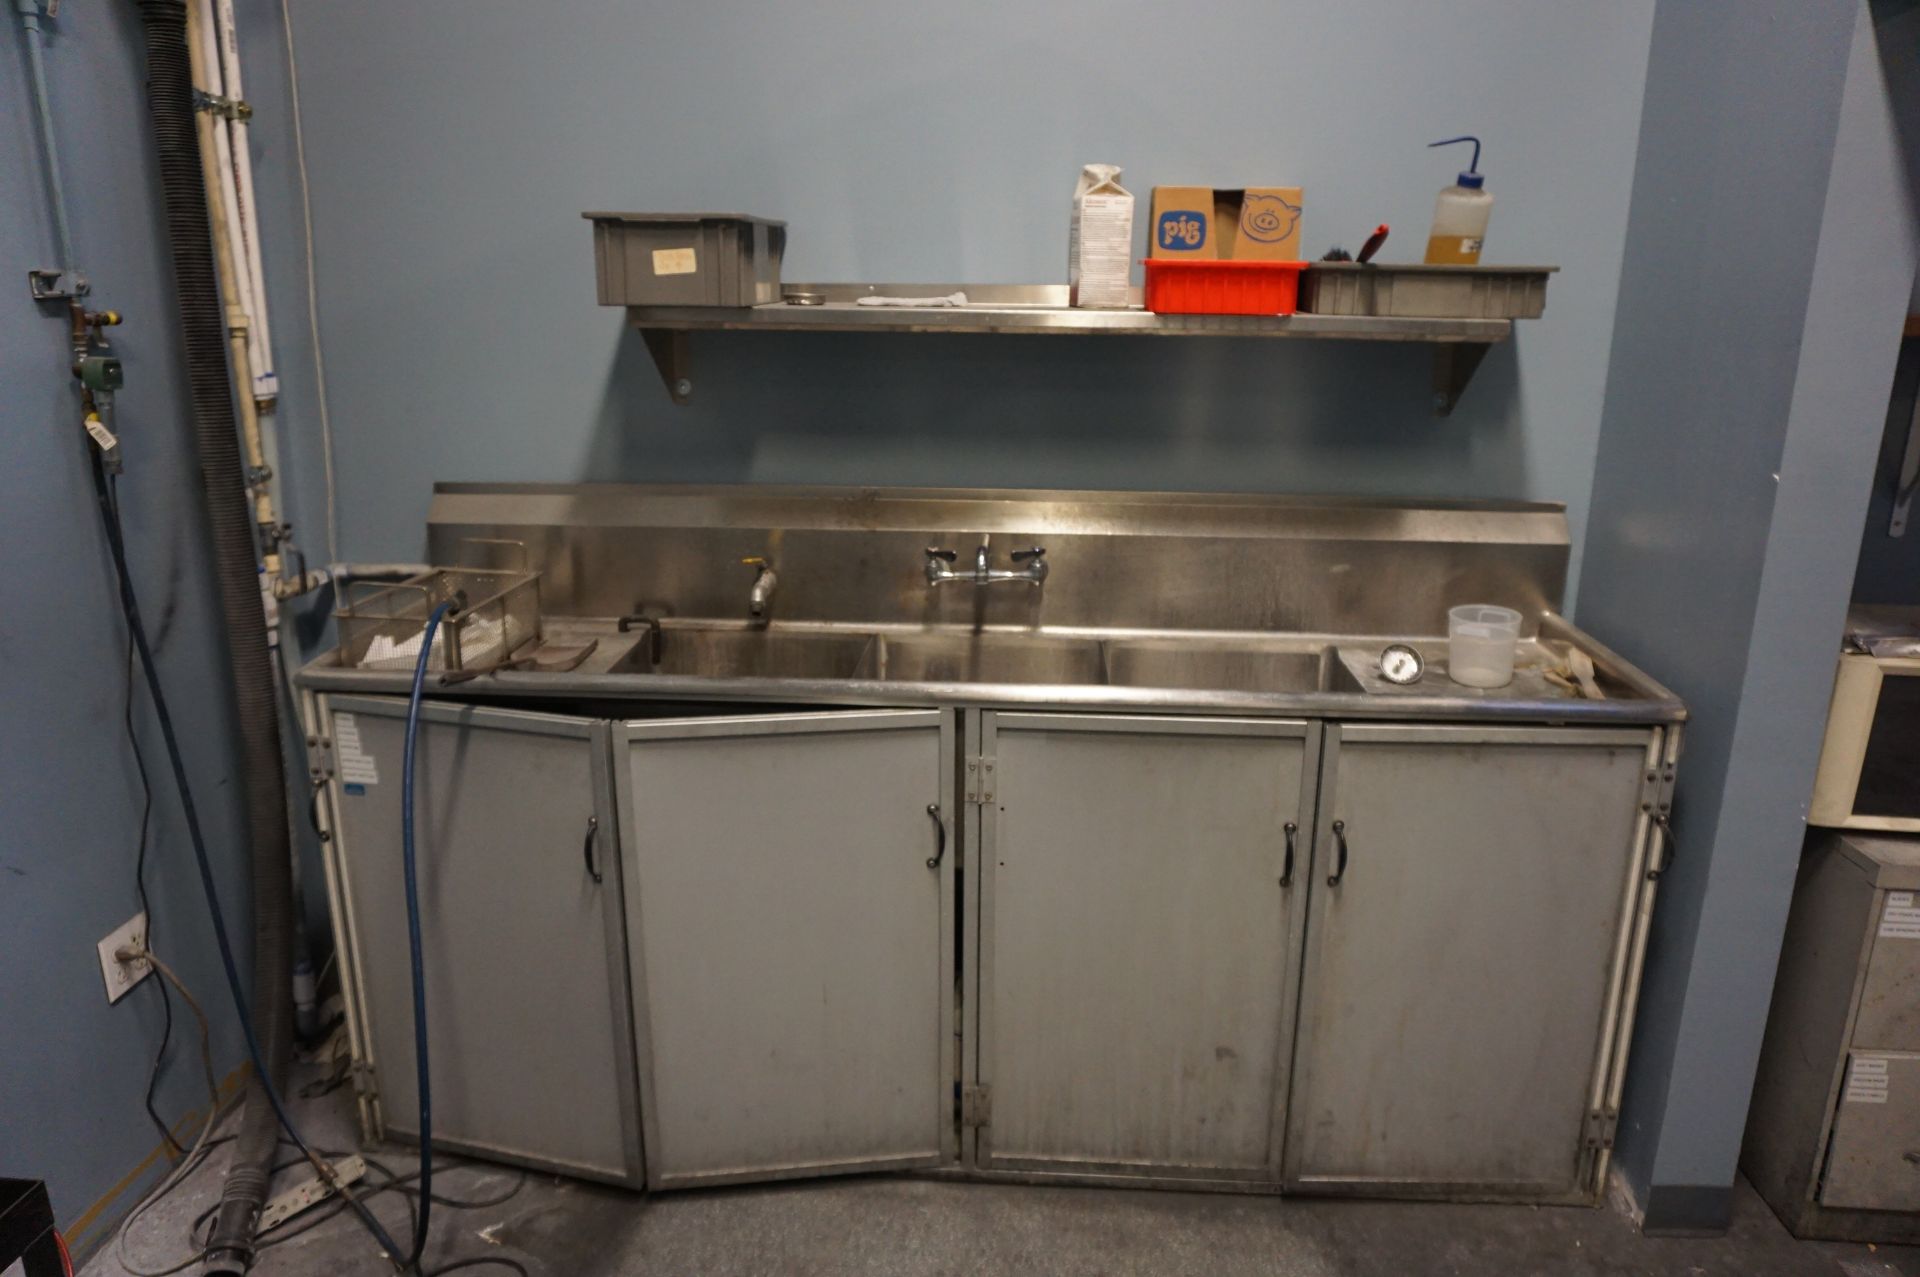 LOT TO INCLUDE: STAINLESS STEEL SINK AREA WITH CONTENTS, STAINLESS STEEL BENCH, FILE CABINET, - Image 4 of 6